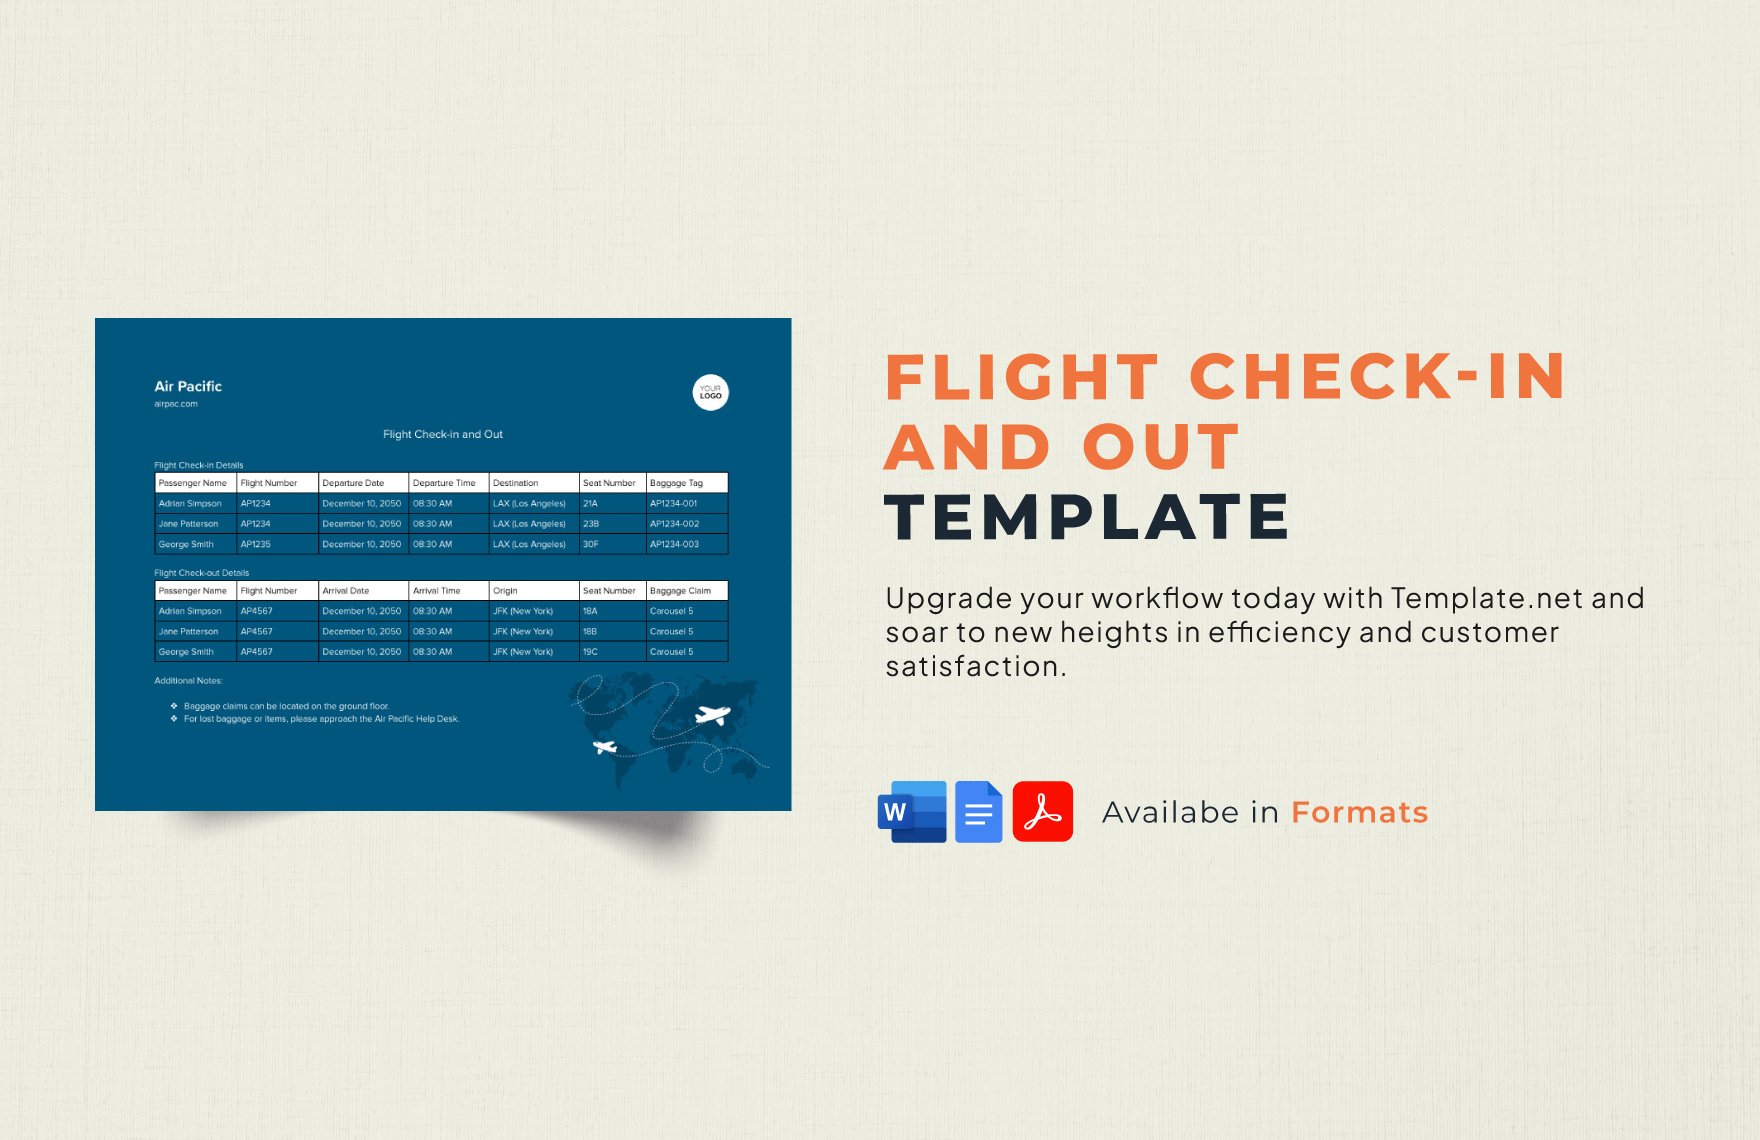 Flight Check-in and Out Template